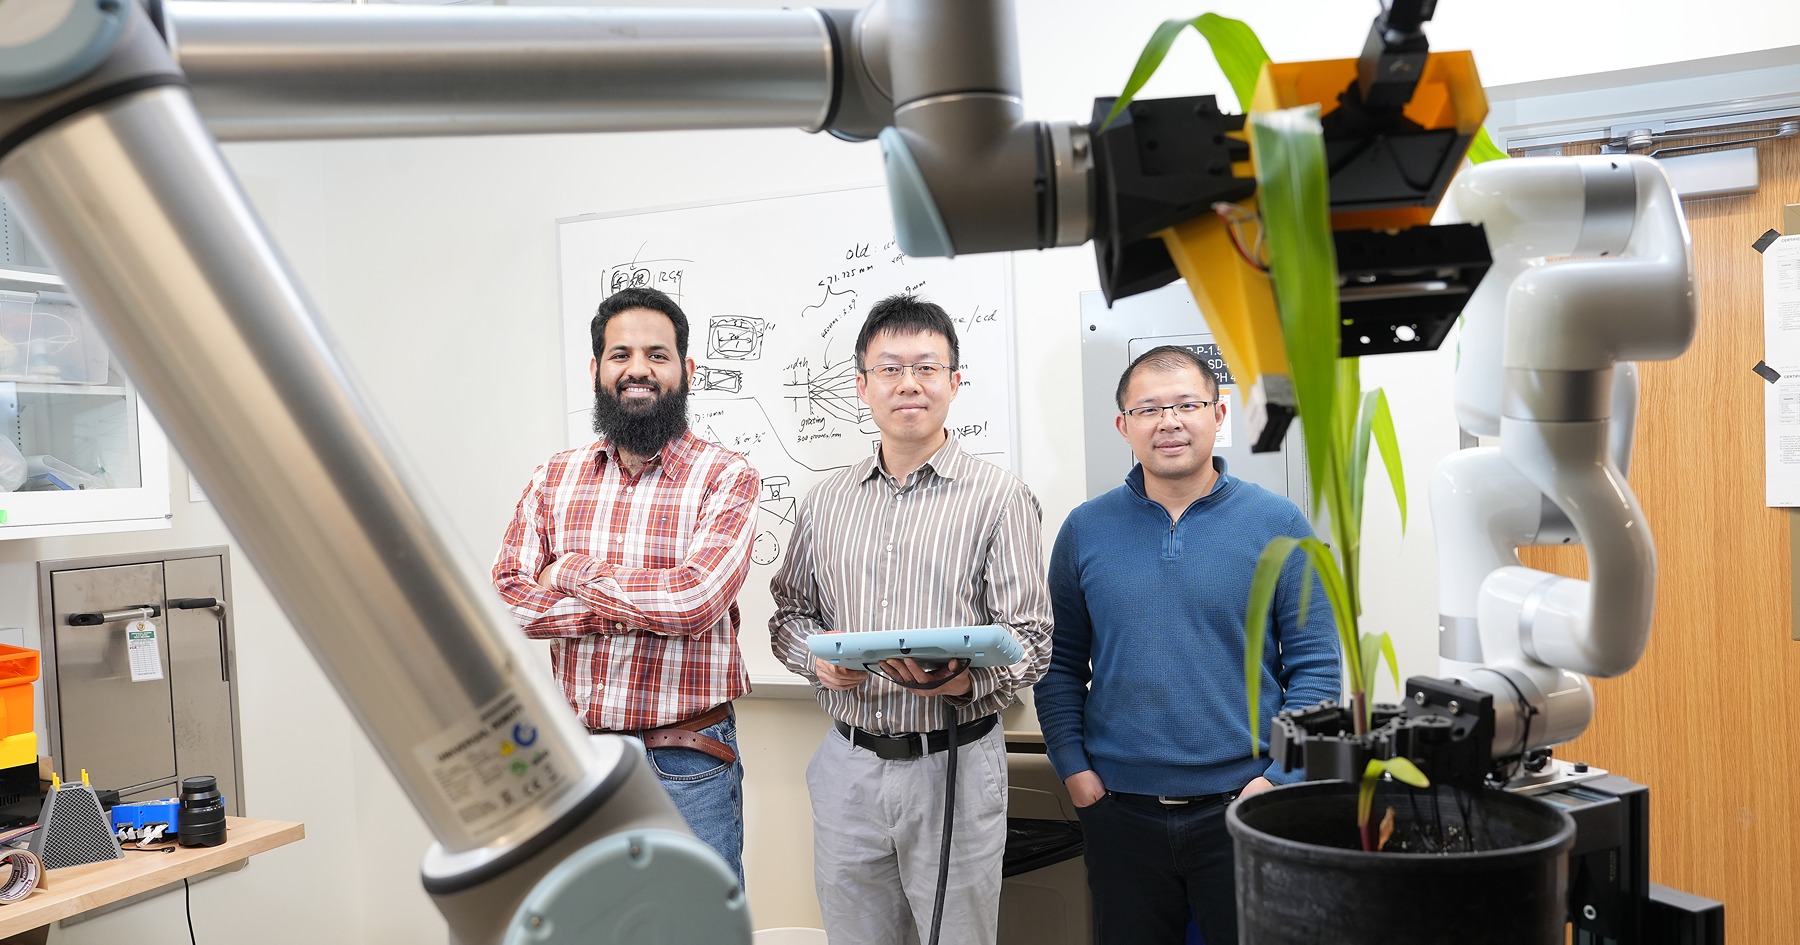 a robotic arm reaches out to touch a corn plant leaf. you can see the Sheeraz Athar, Jian Jin, and Yu She in the where the arm bends